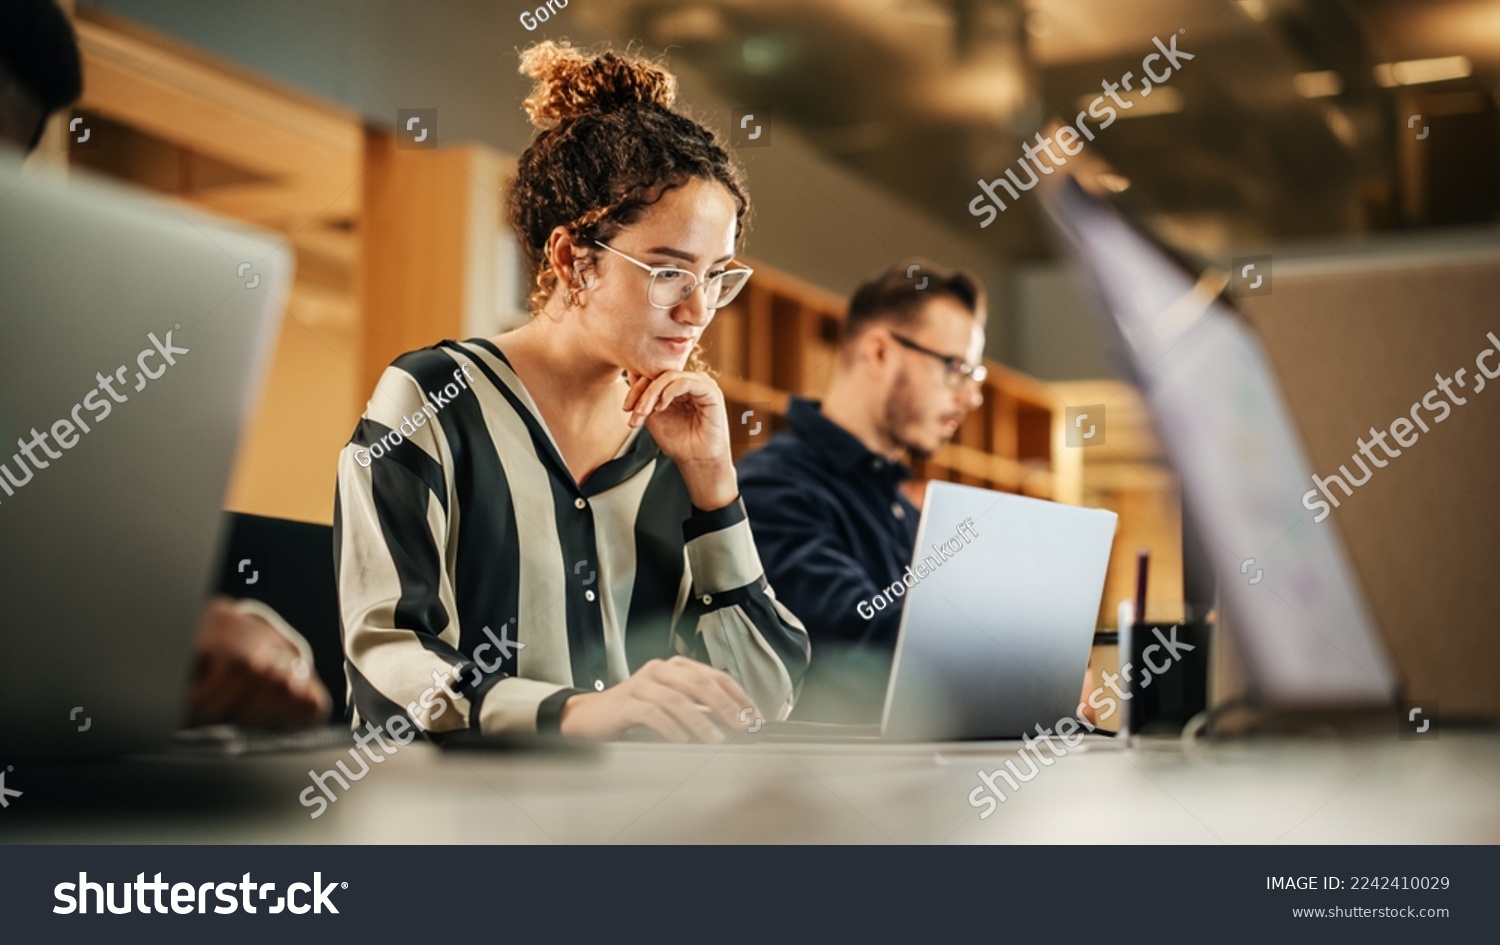 Portrait of Enthusiastic Hispanic Young Woman Working on Computer in a Modern Bright Office. Confident Human Resources Agent Smiling Happily While Collaborating Online with Colleagues. #2242410029